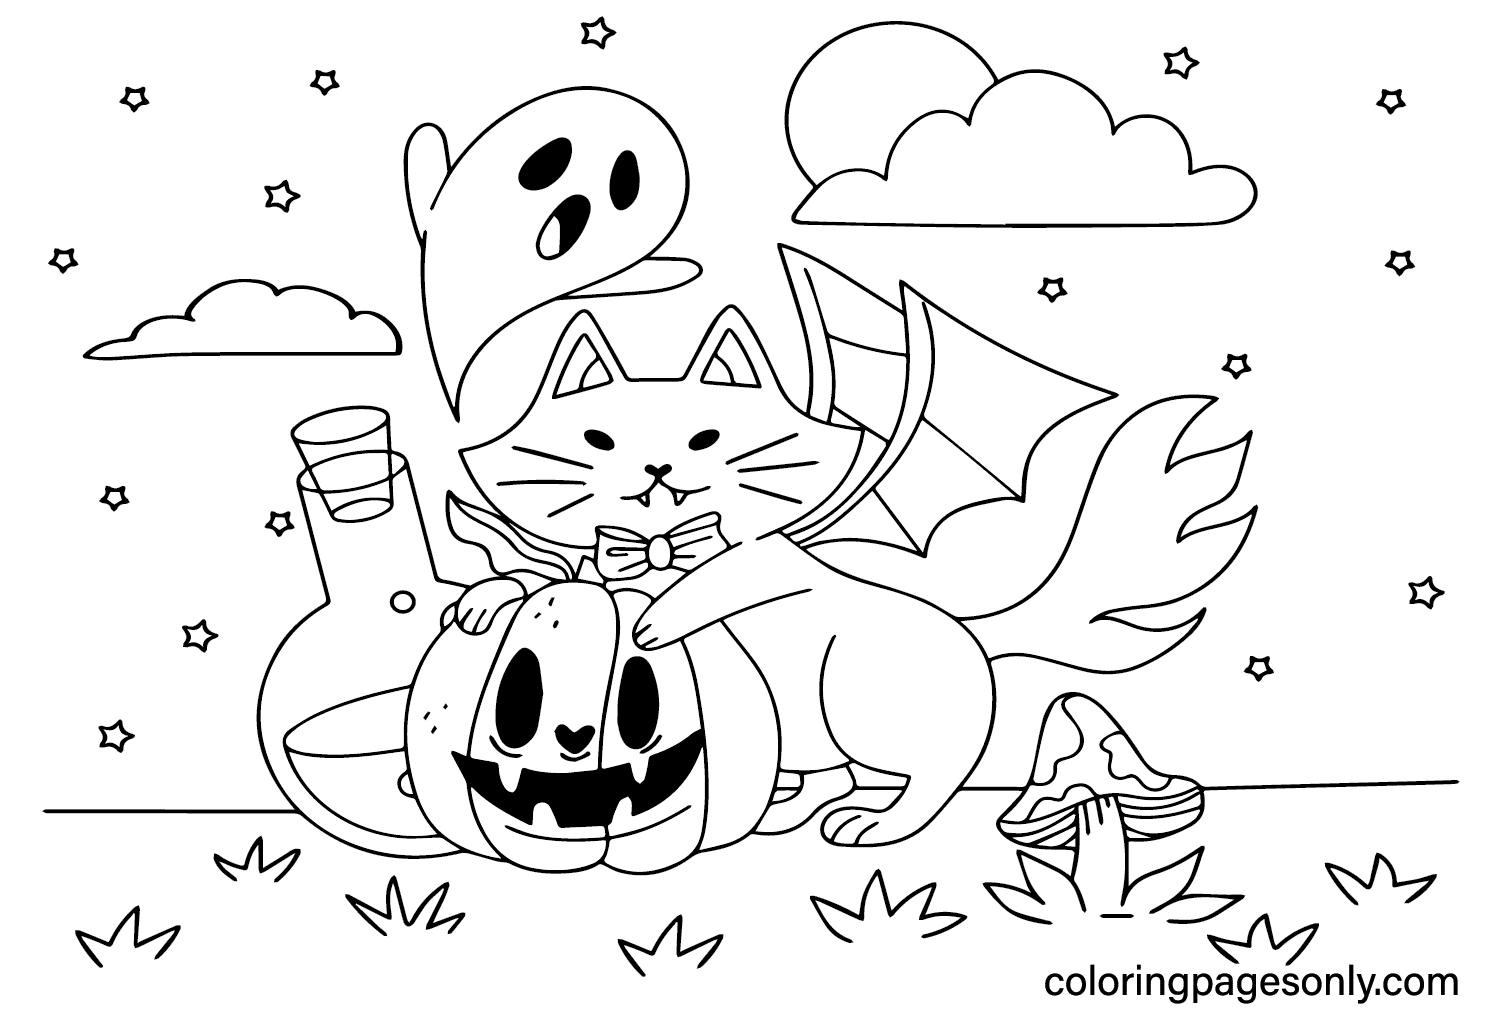 Printable Cute Halloween Coloring Page - Free Printable Coloring Pages